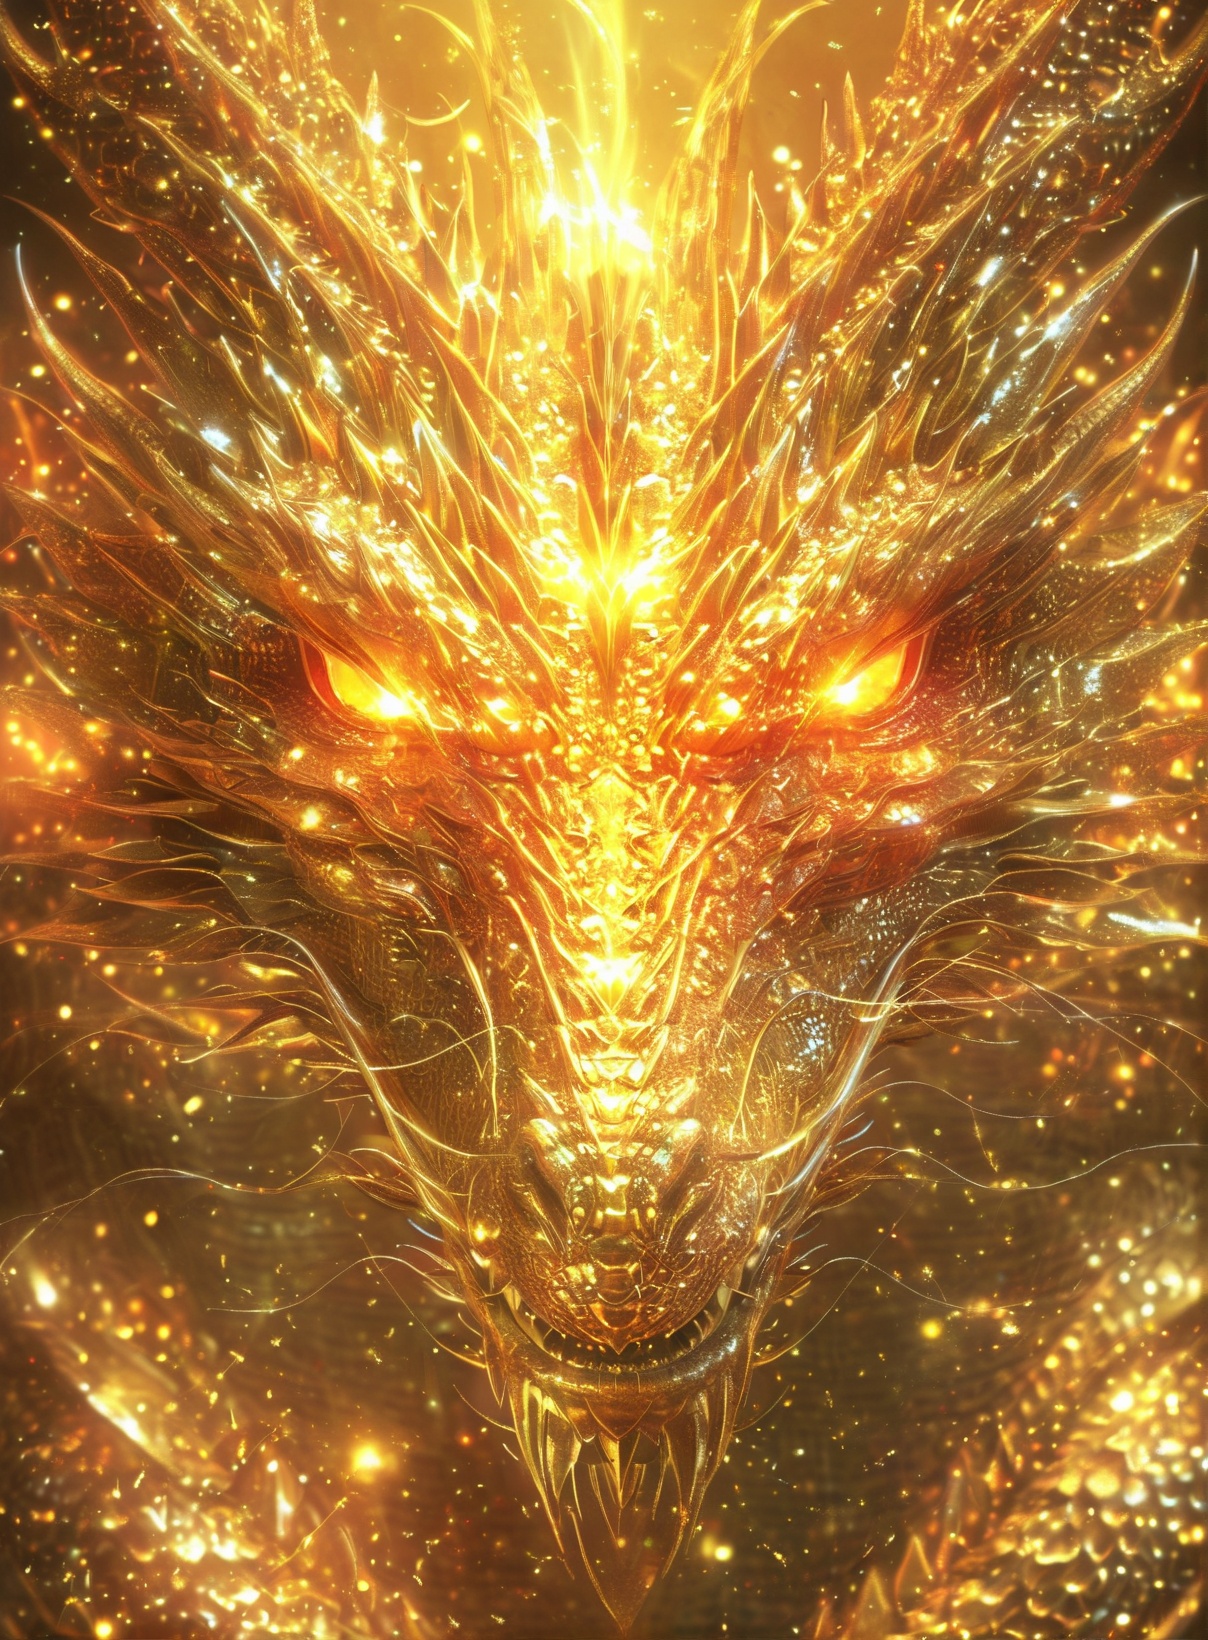 a majestic and intricately detailed dragon, seemingly made of gold or a similar shimmering material. The dragon's face is prominently displayed, with its eyes glowing a bright, fiery orange. The scales of the dragon are meticulously crafted, reflecting light and giving it a shimmering appearance. The background is filled with golden particles, possibly representing sparks or embers, adding to the ethereal and magical ambiance of the scene<lora:KING Gardon-000010:1>